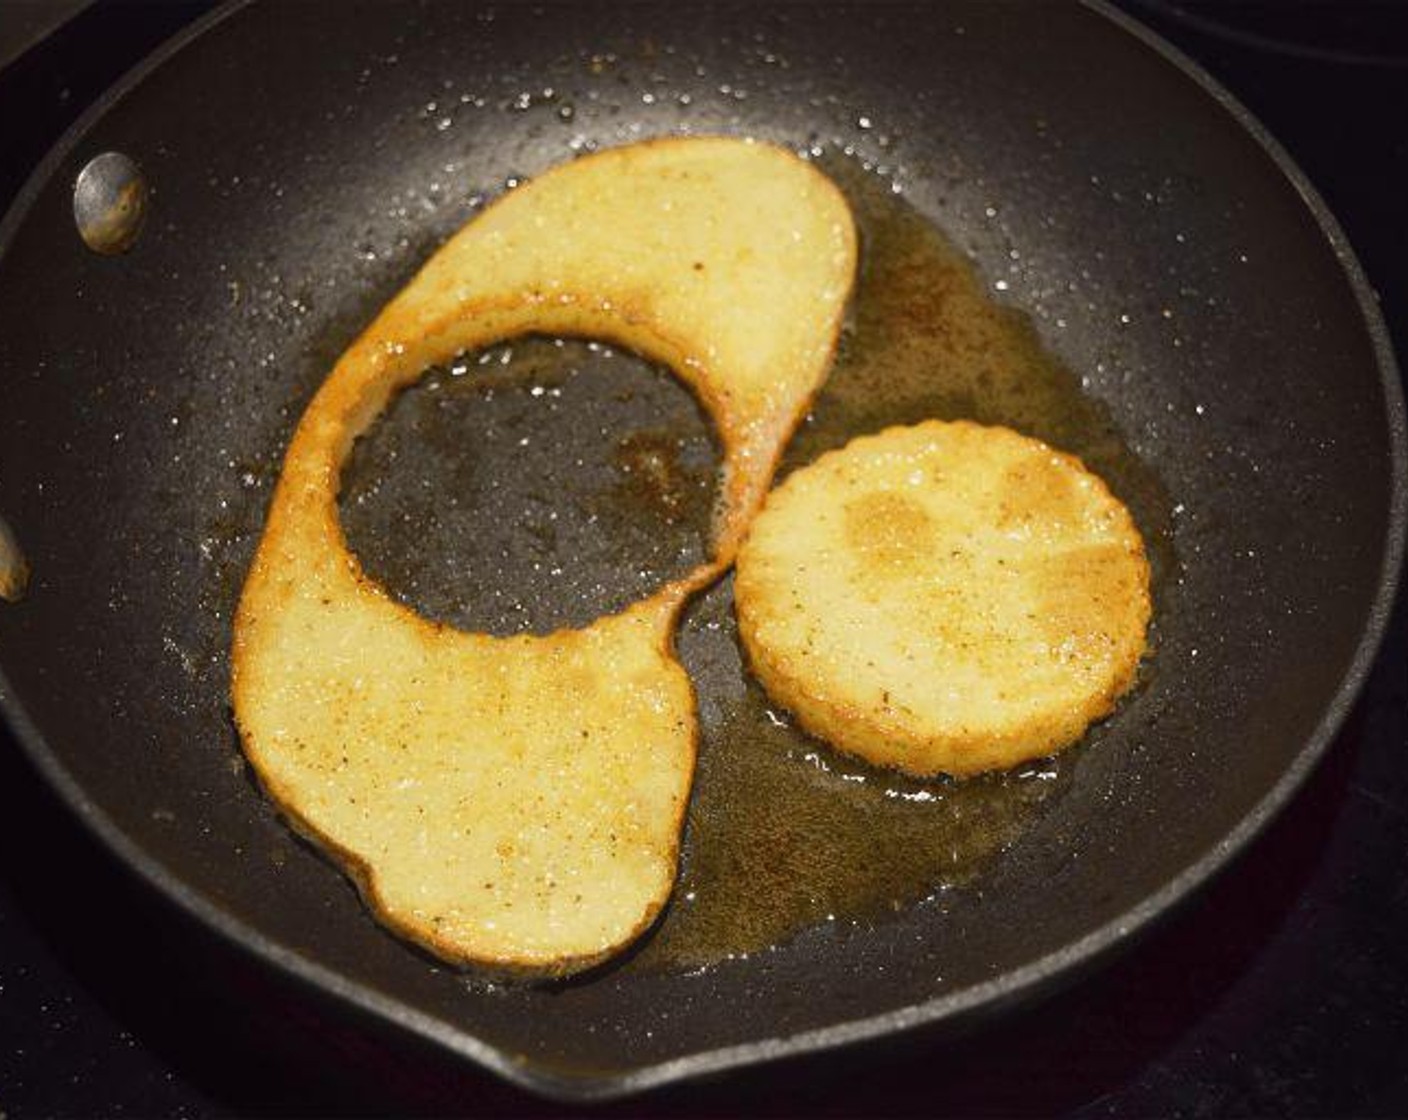 step 2 Add Olive Oil (1/2 tsp) and Butter (1/2 tsp) to a skillet over medium heat. Add the potato (slice and cut-out) and cook for 4 minutes on the first side. Flip and cook for 3 more minutes.